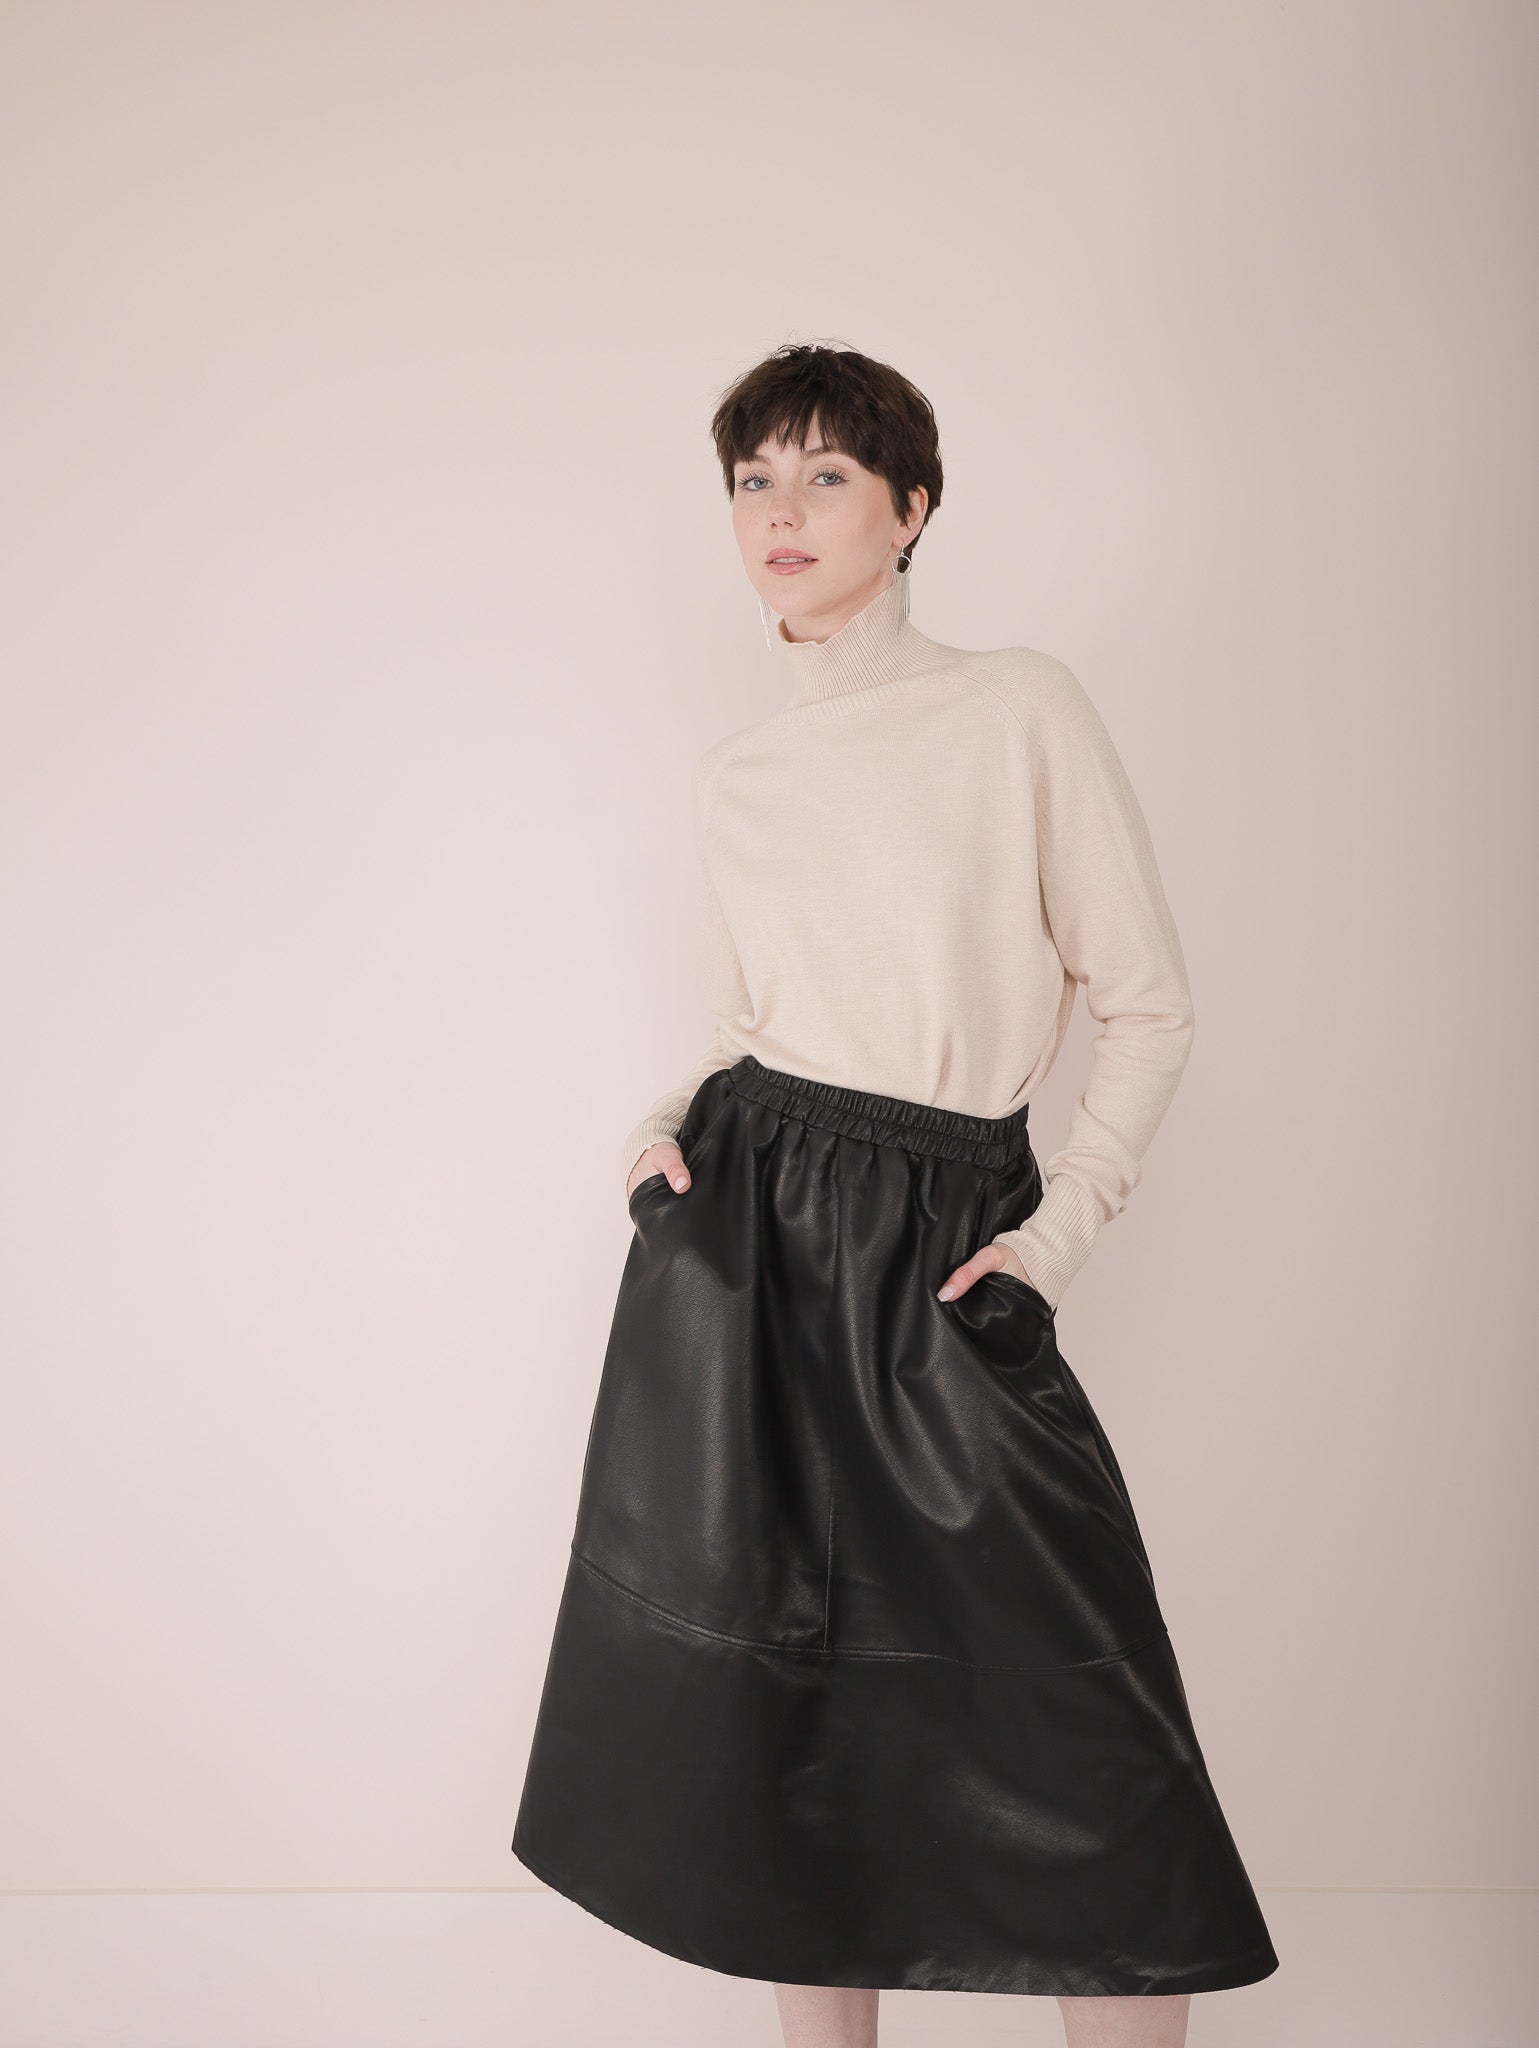 Molly Green - Remi Leather Midi Skirt - Skirts